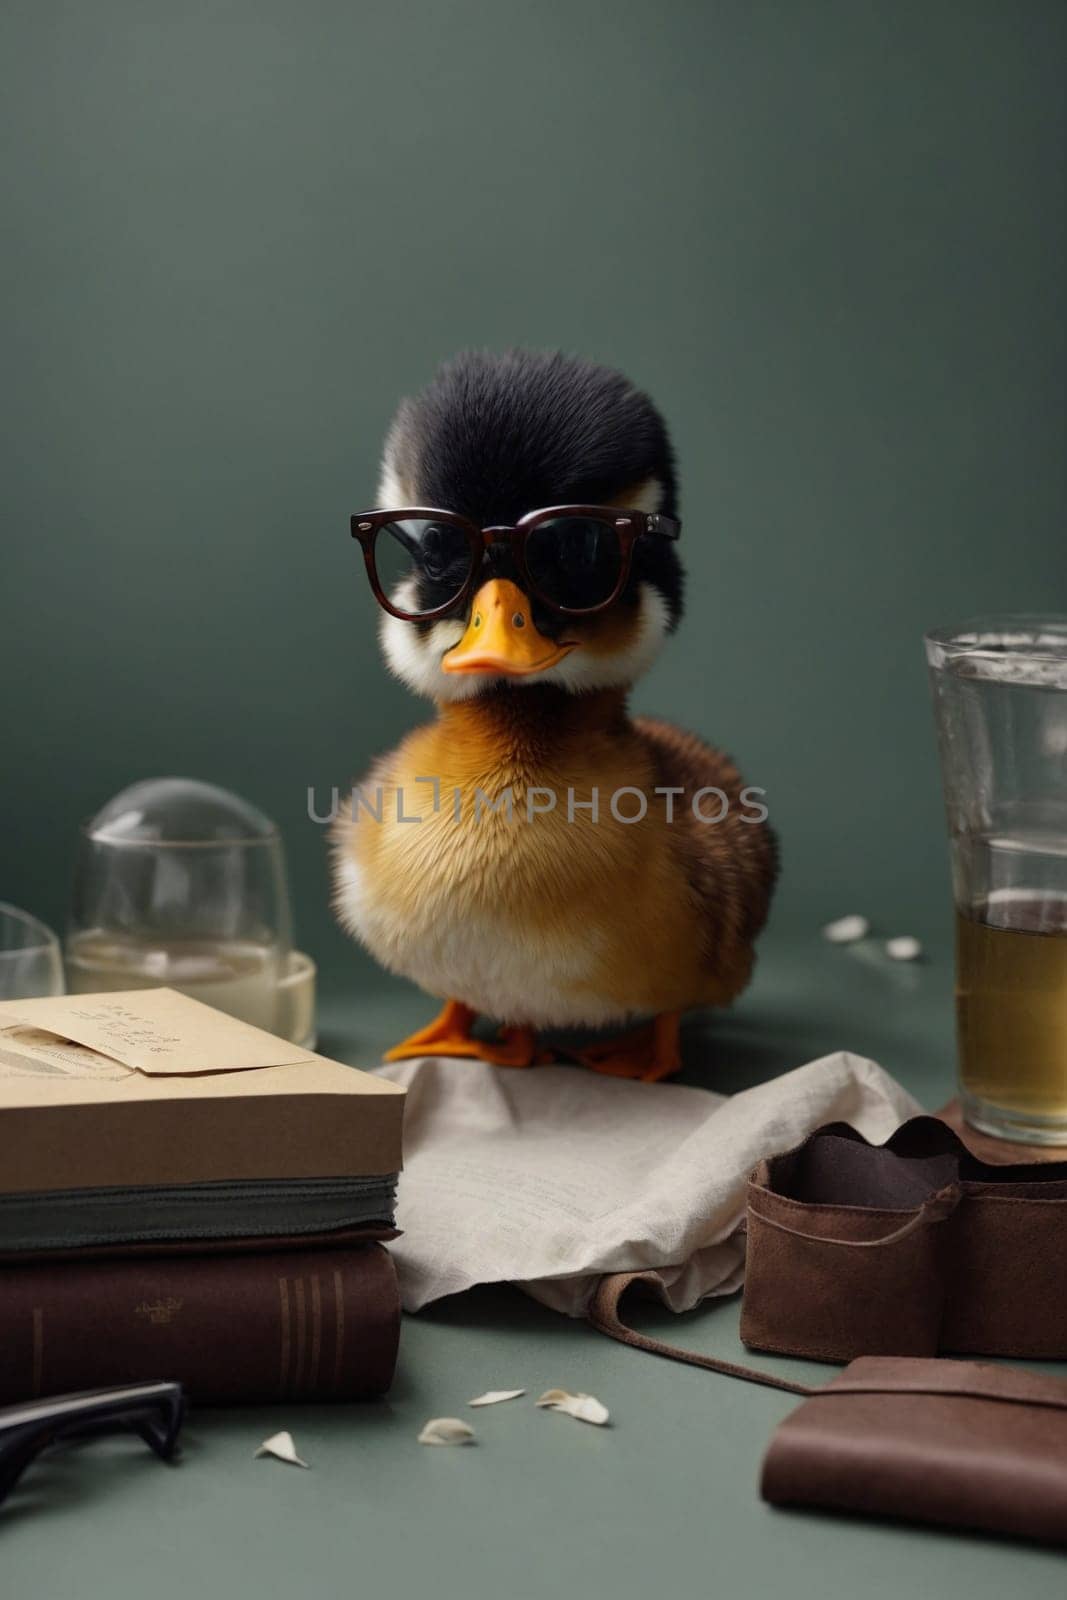 A duck wearing glasses sits on top of a table, showcasing its unique accessory.